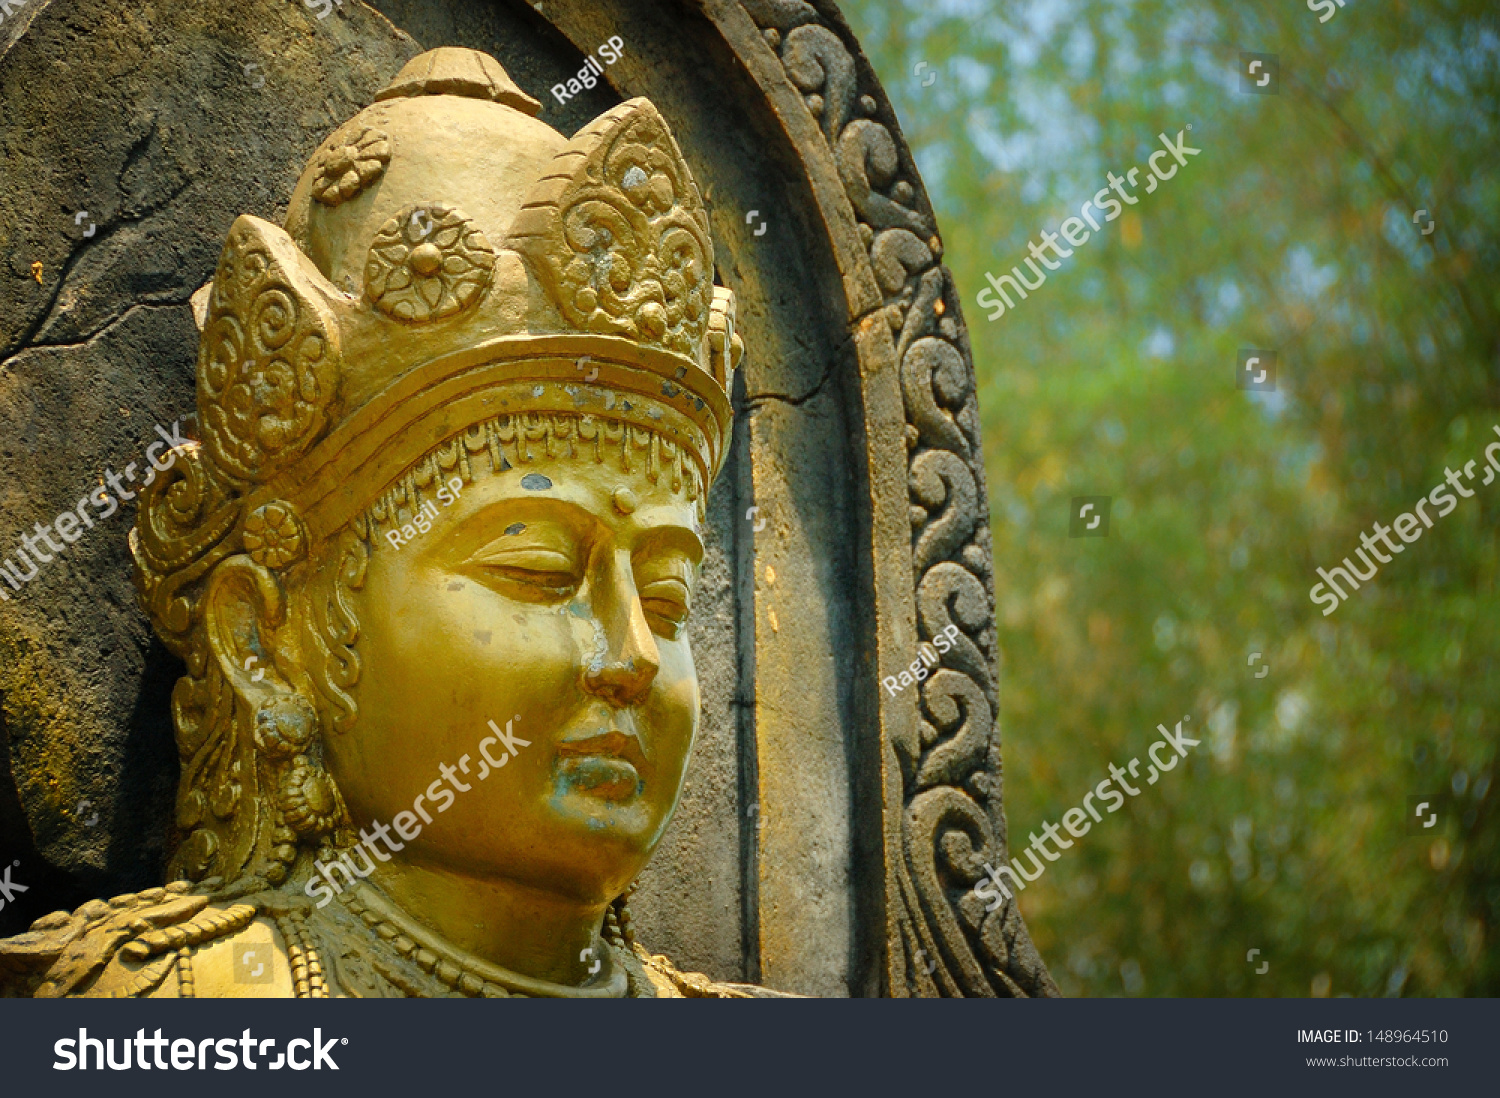 Save to a lightbox - stock-photo-gold-female-figure-statue-taken-at-ken-dedes-monument-malang-east-java-indonesia-148964510